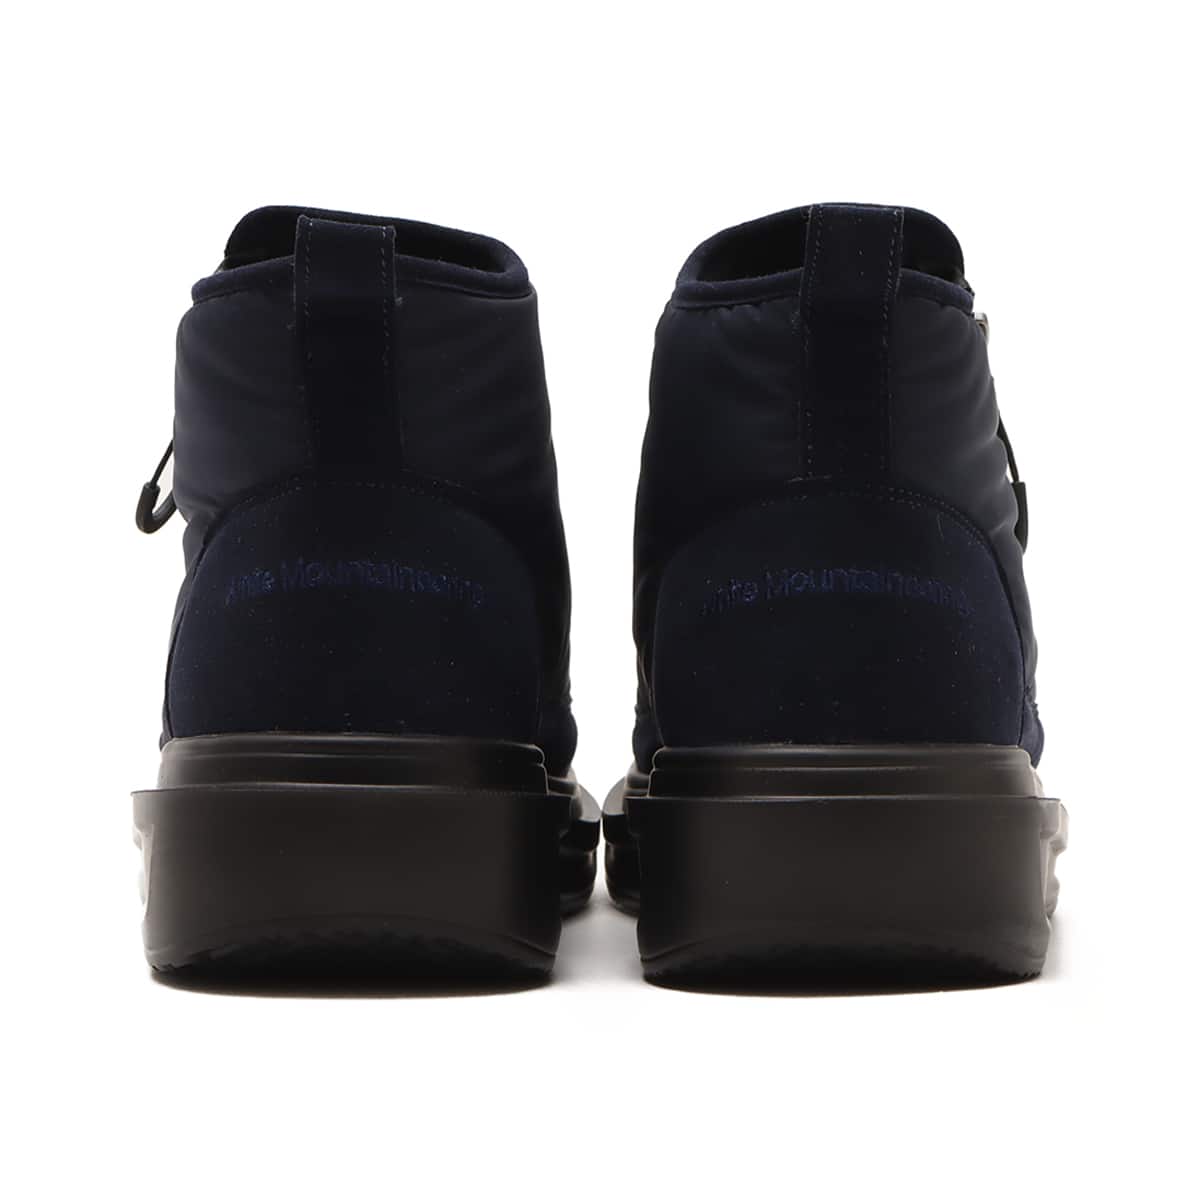 WHITE MOUNTAINEERING x SUBU ZIP UP BOOTS NAVY 23FA-I